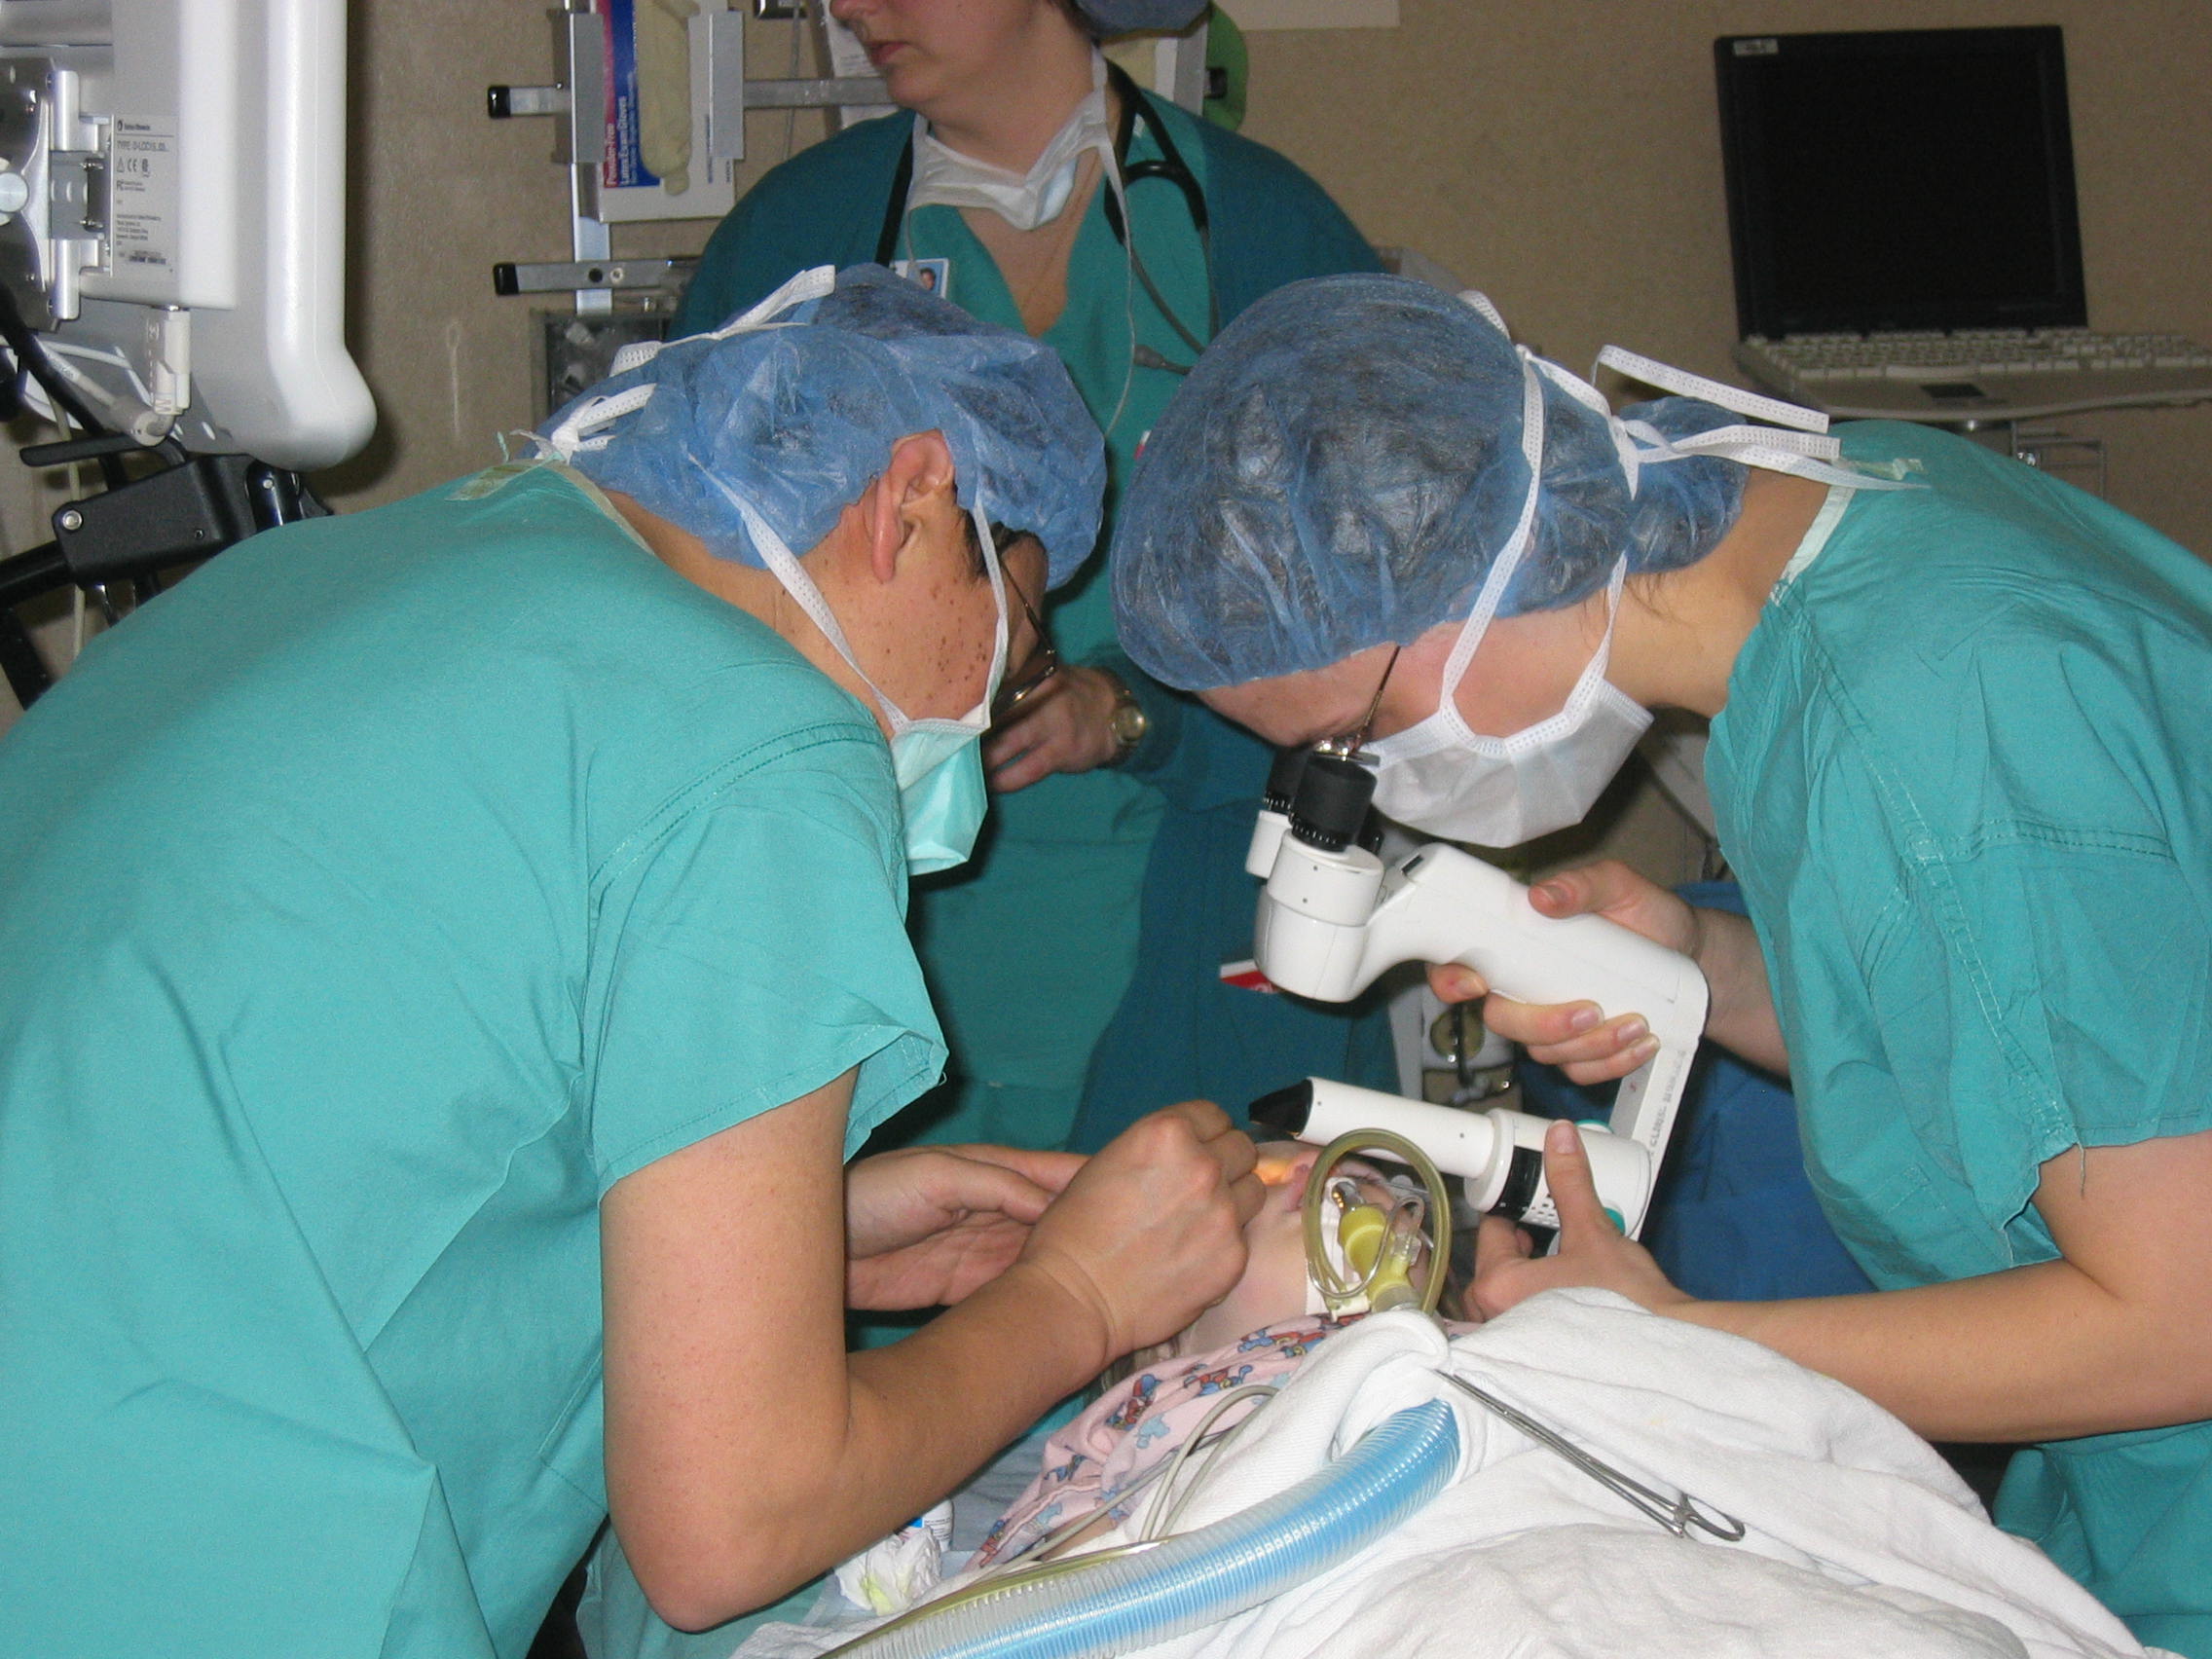 doctors exming glaucoma patient under anesthesia